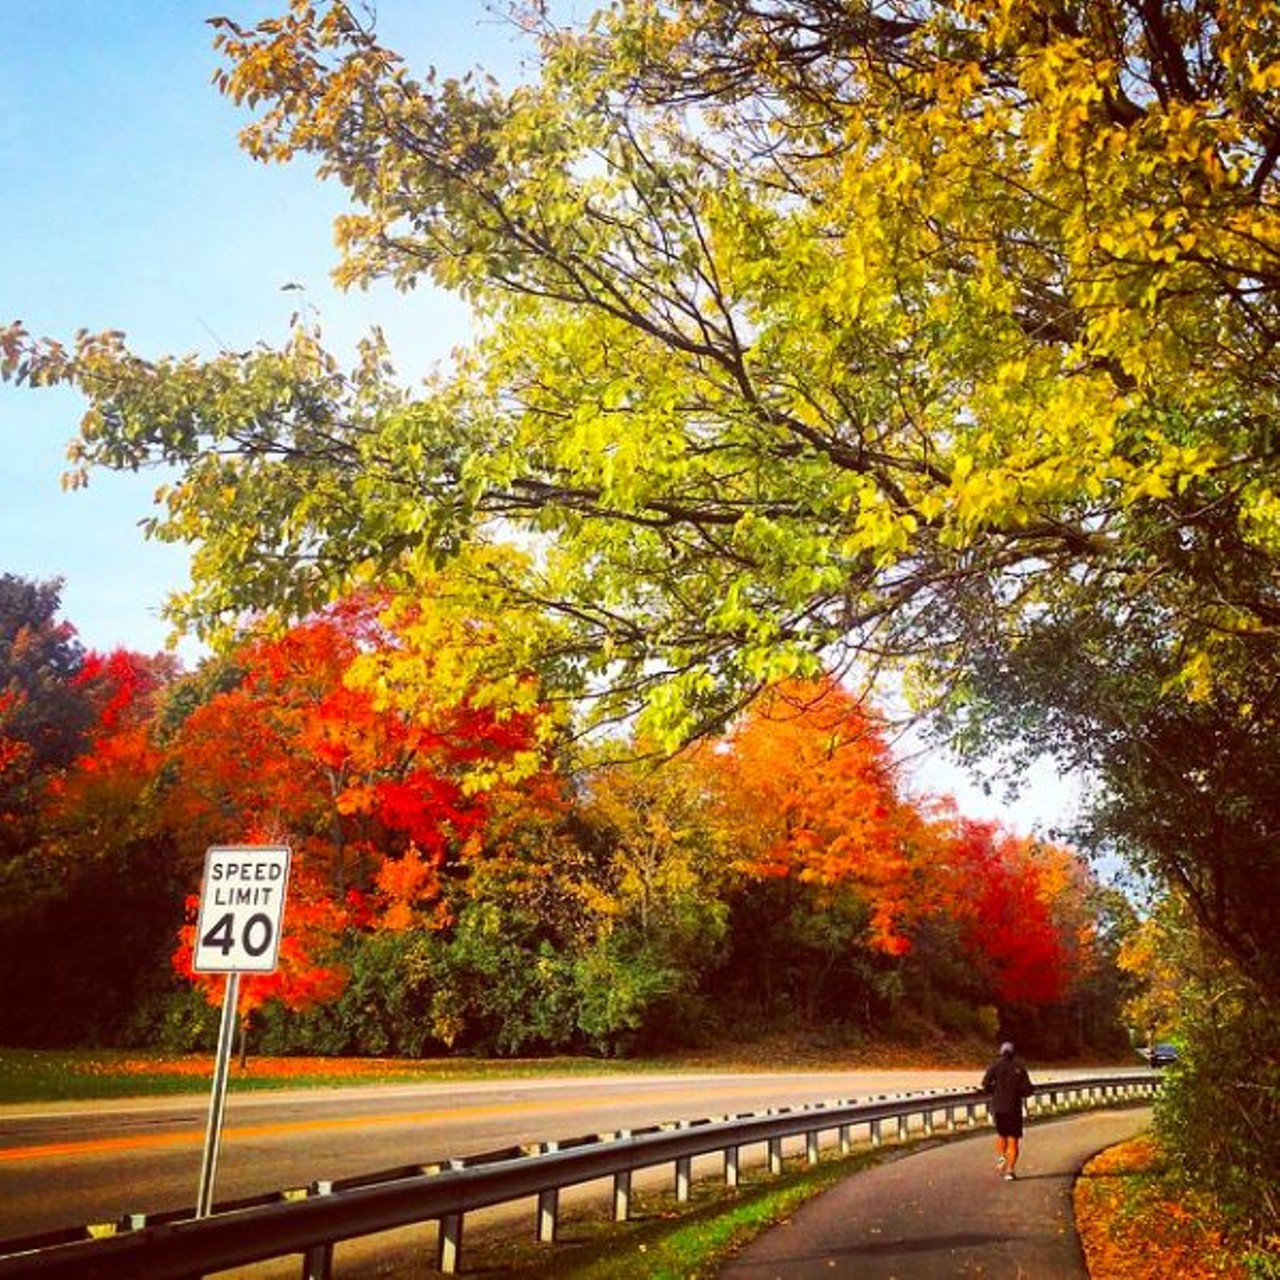 Hines Drive
If you are looking for a more hilly run, you&#146;ve come to the right place. From Dearborn to Northville, this paved trail stretches 17 beautiful miles along a tree lined road full of rolling hills sure to give you an intense workout. This trail is even more scenic in the fall when the leaves change colors.
Photo via IG user @kathygarfield